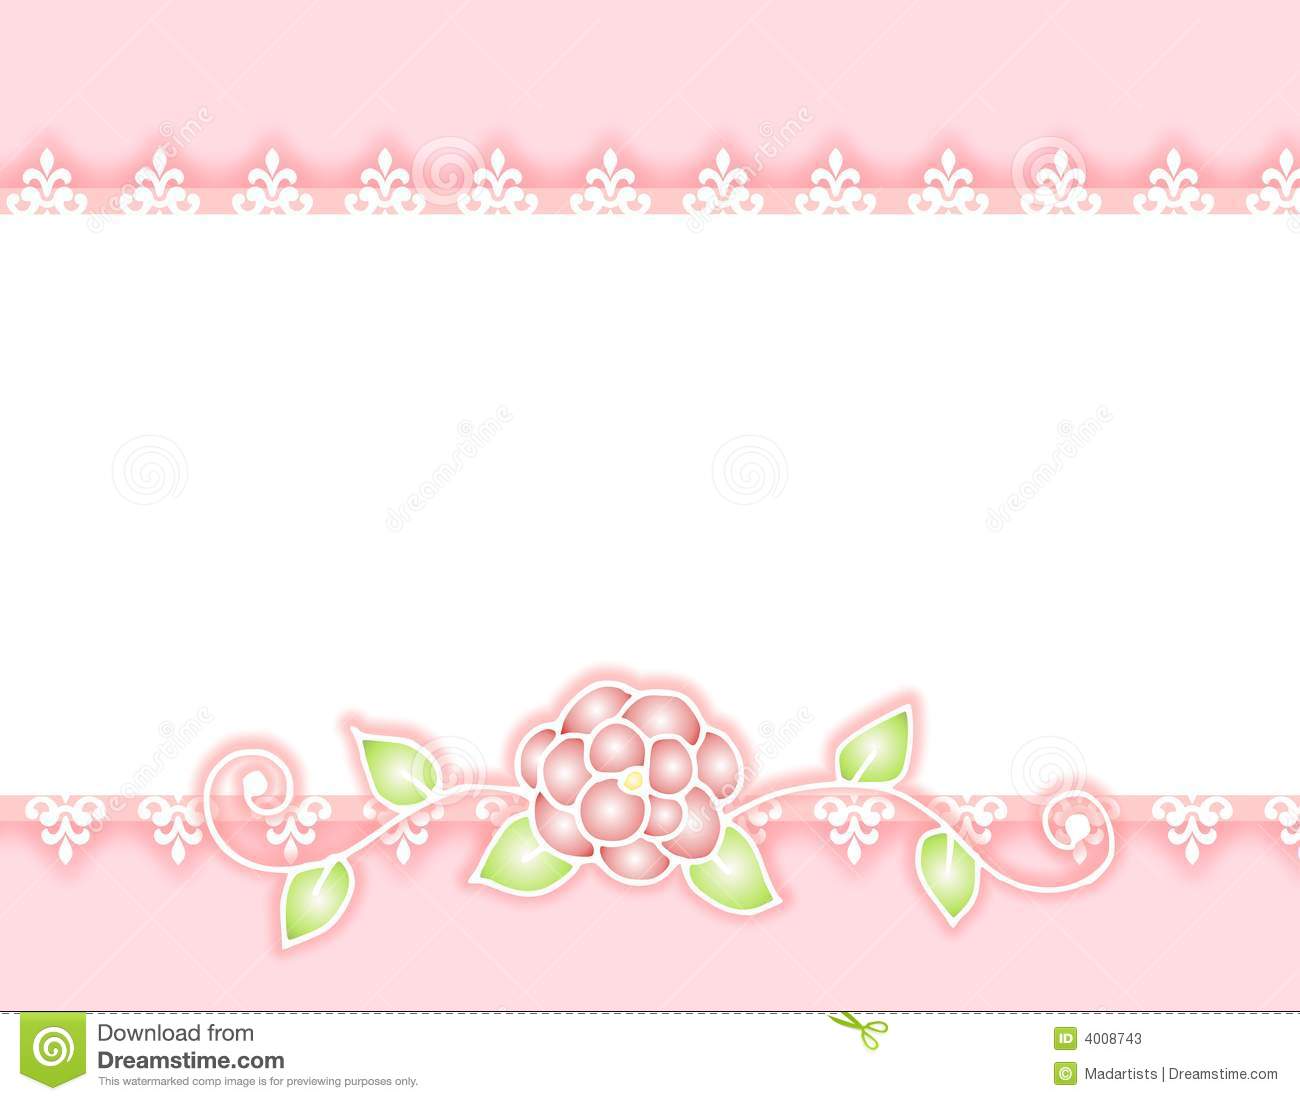 White Lace Border Graphicwhite Lace Pink Ribbon And Rose Border Stock